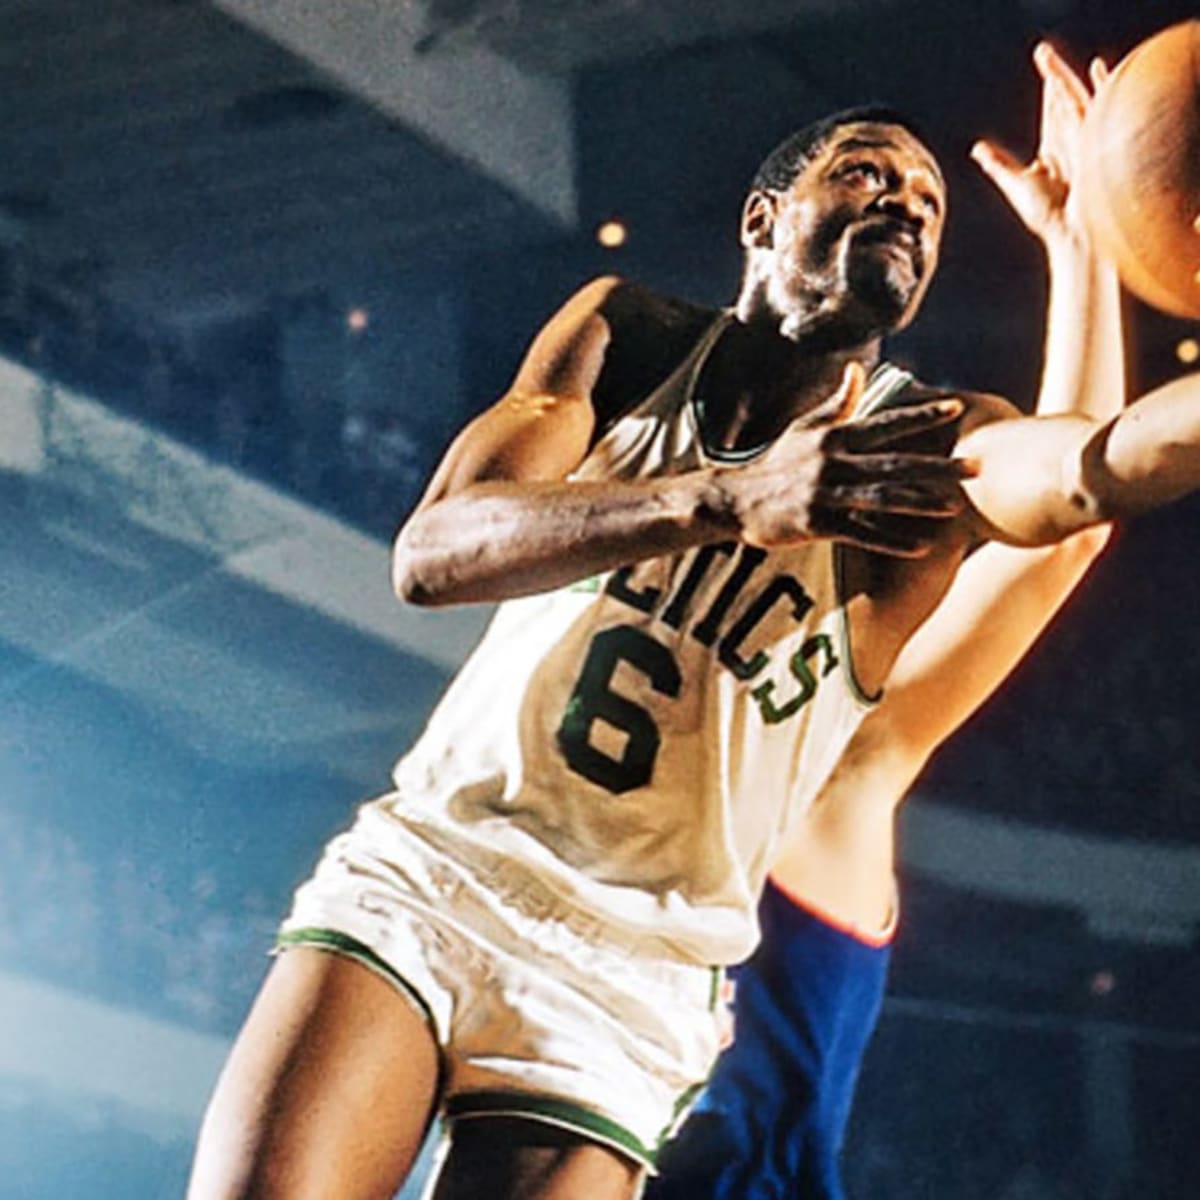 On the day of Bill Russell's private funeral, NBA announces its greatest  honor: the permanent retirement of No. 6 - The Boston Globe